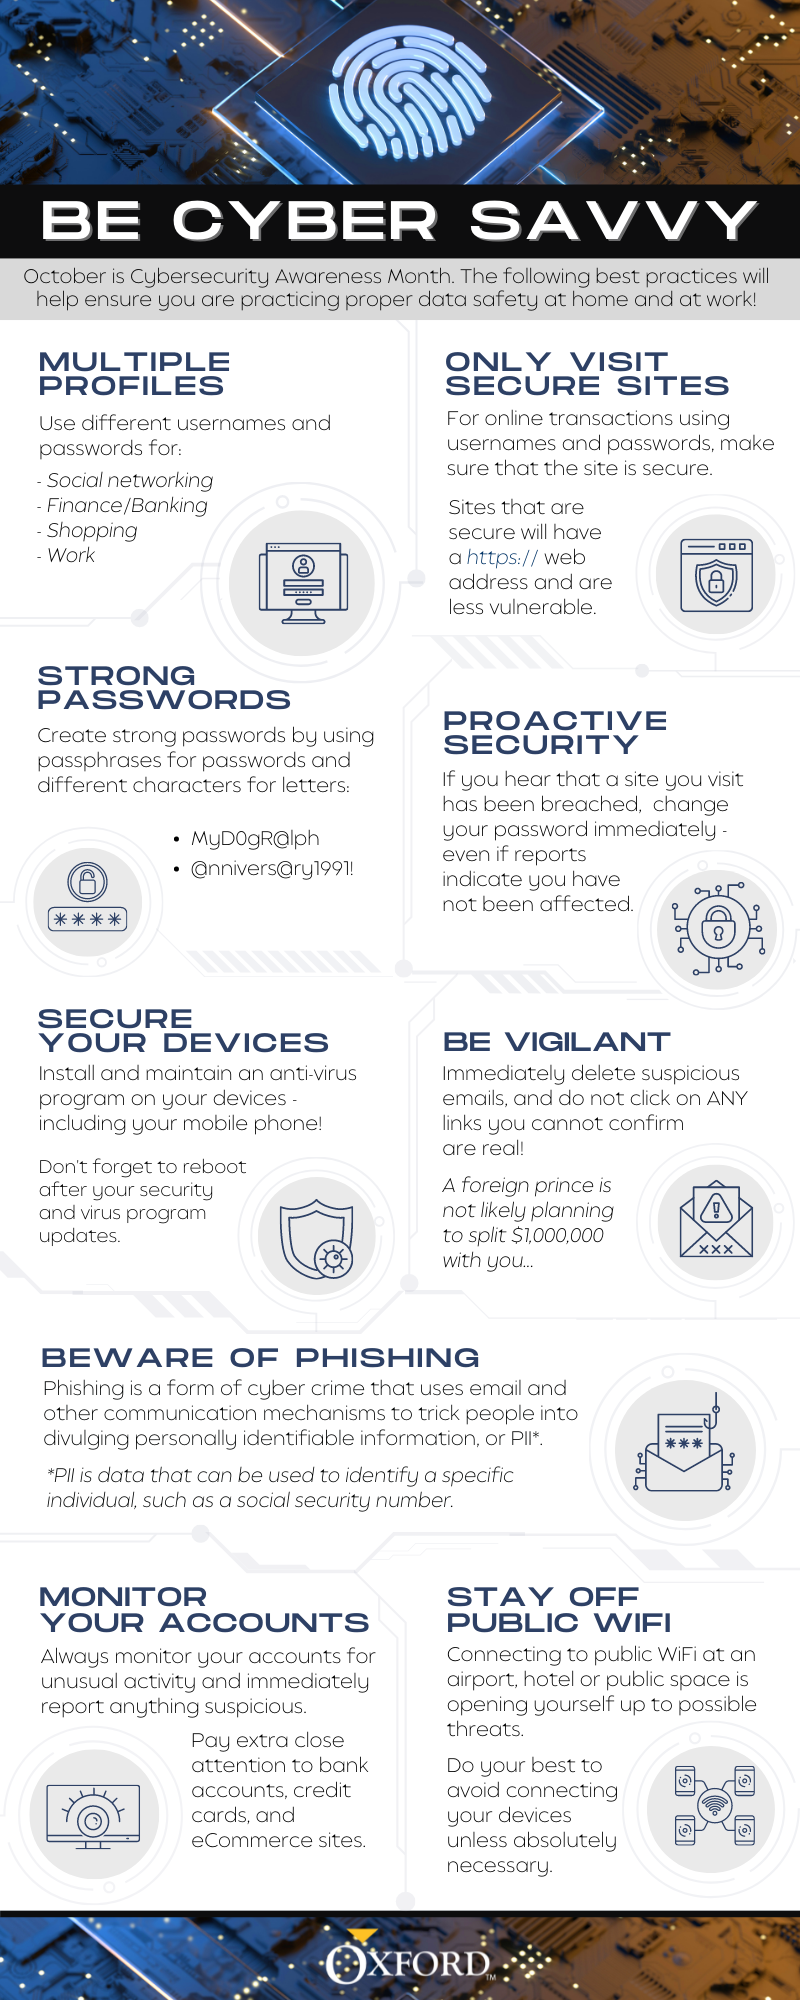 Protect yourself during cybersecurity awareness month